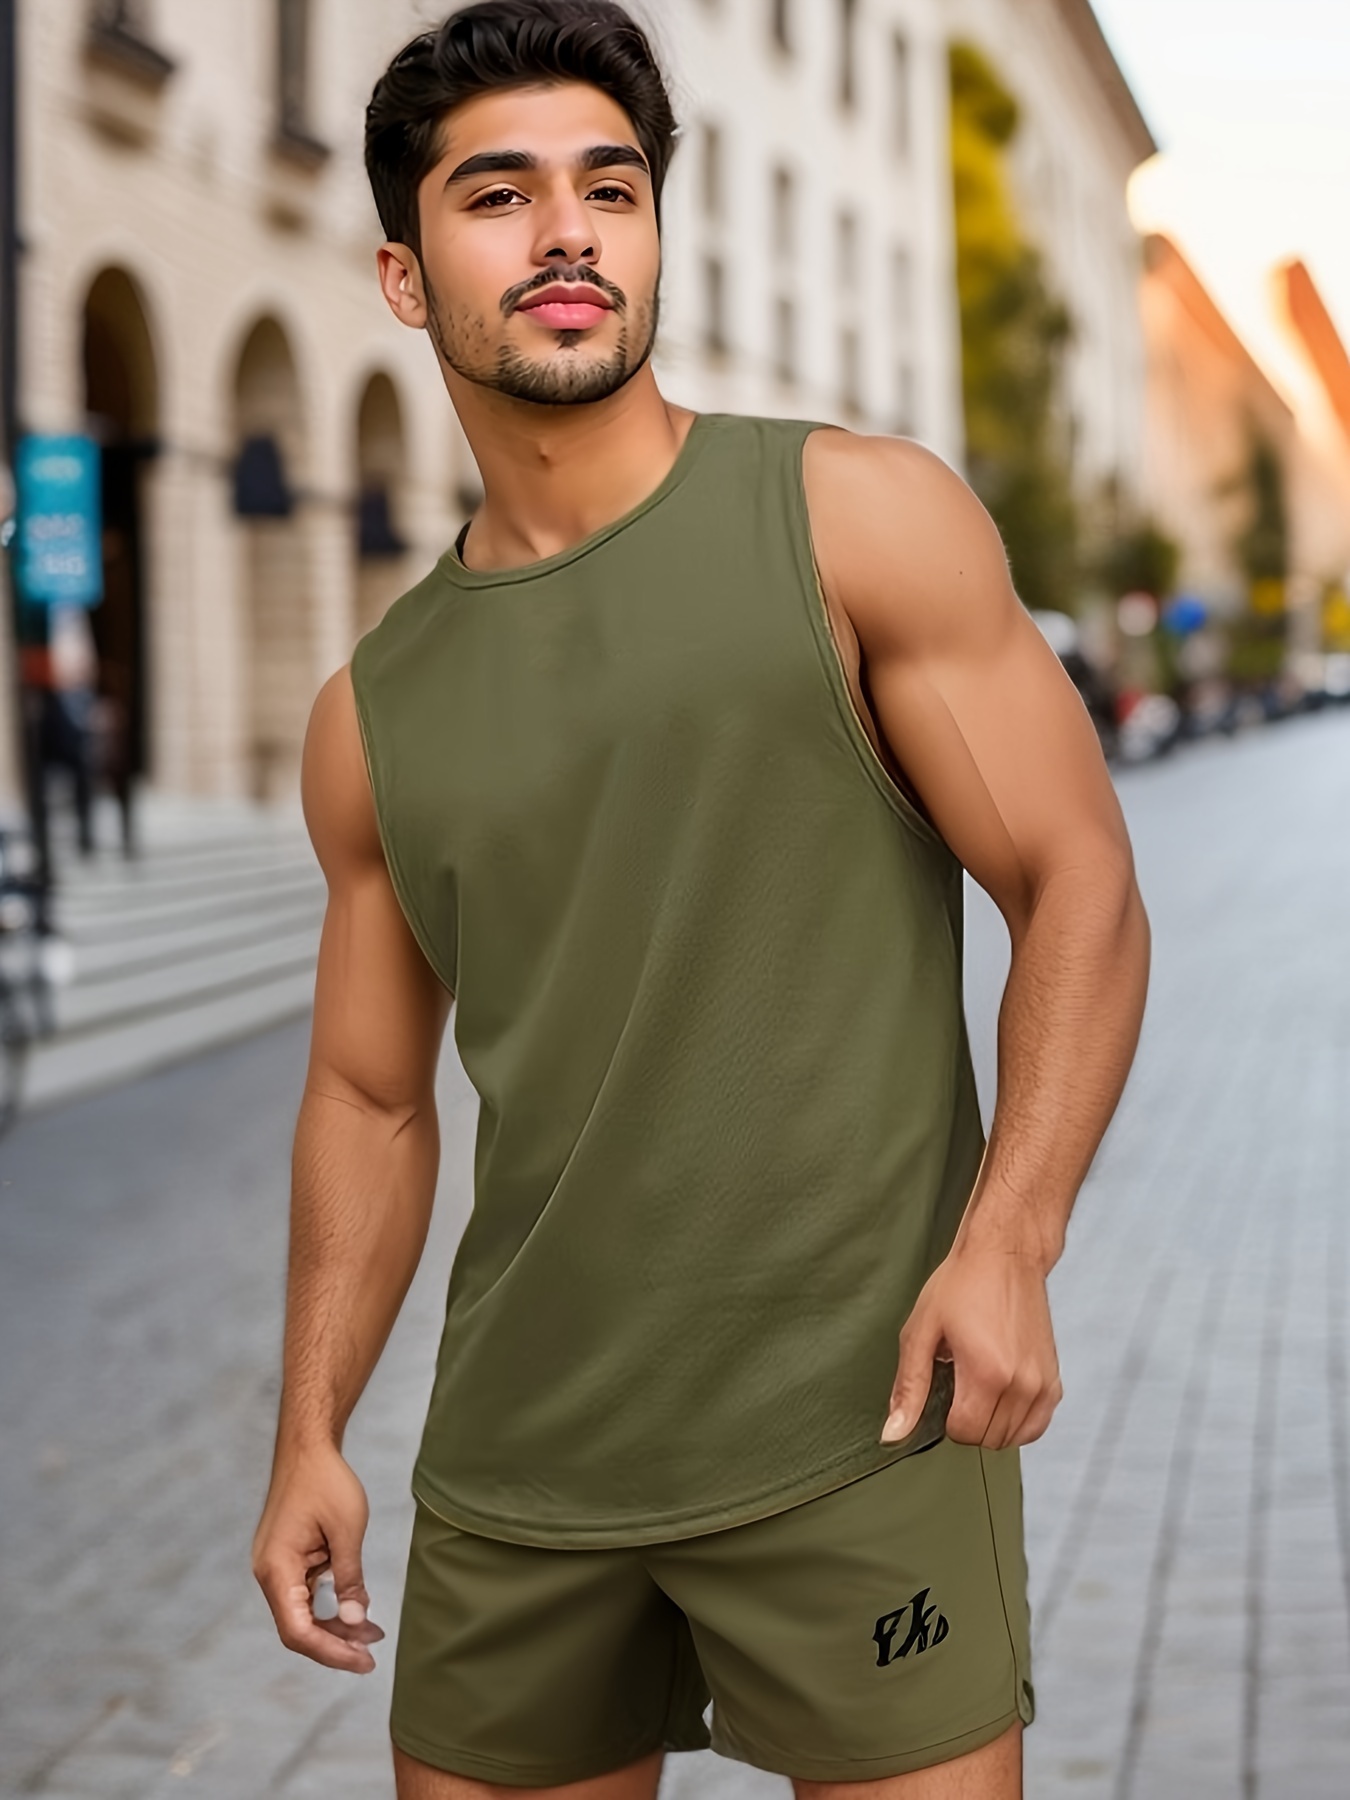 Men's Solid Tank Tops Summer Clothing Gym Bodybuilding Training Fitness  Sleeveless Muscle T Shirts Slim Fit Workout Vest Tshirt Top